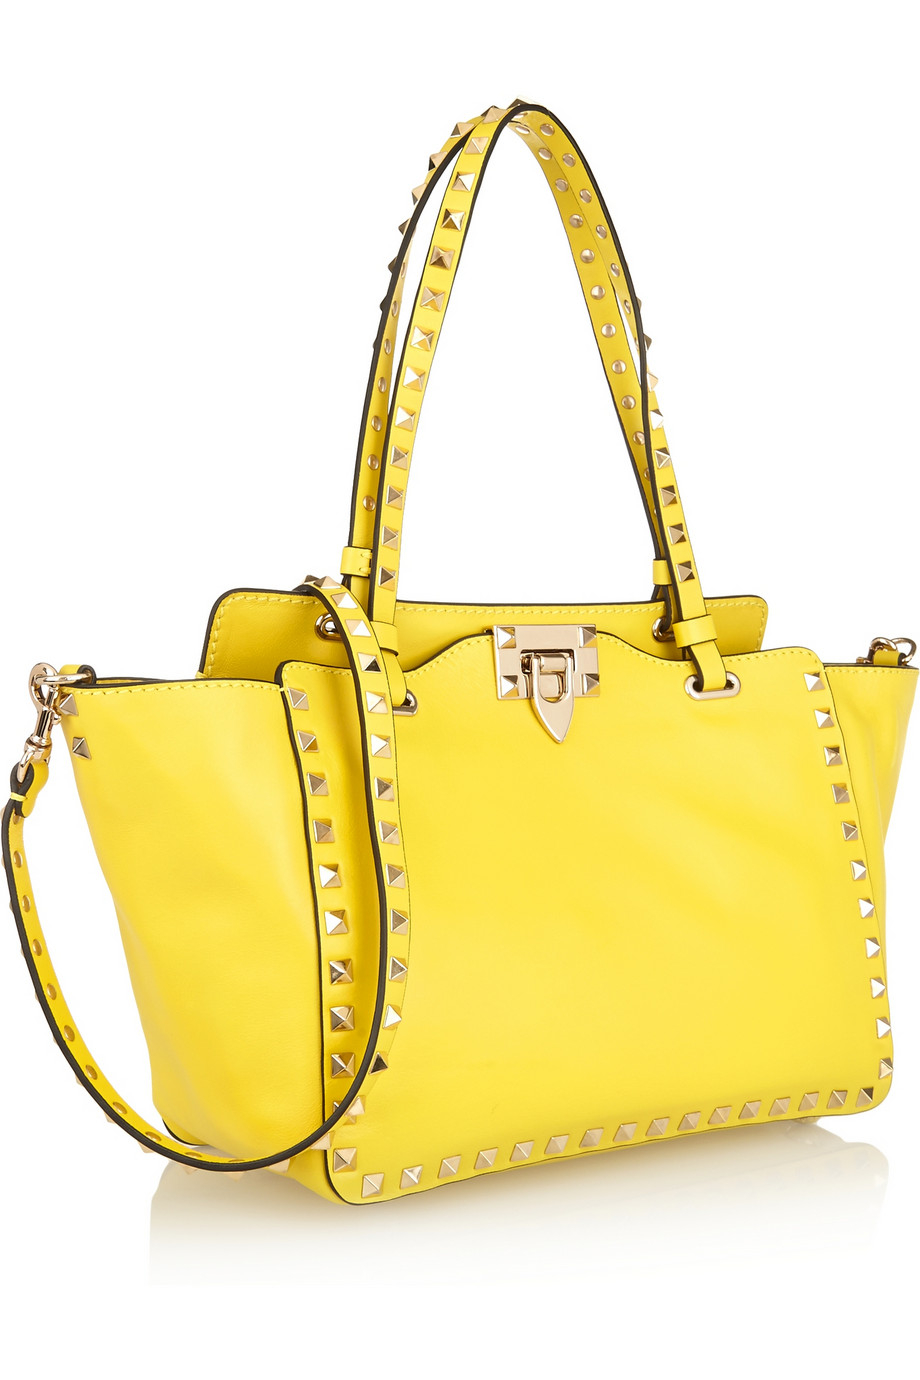 Valentino The Rockstud Small Leather Trapeze Bag in Yellow - Lyst